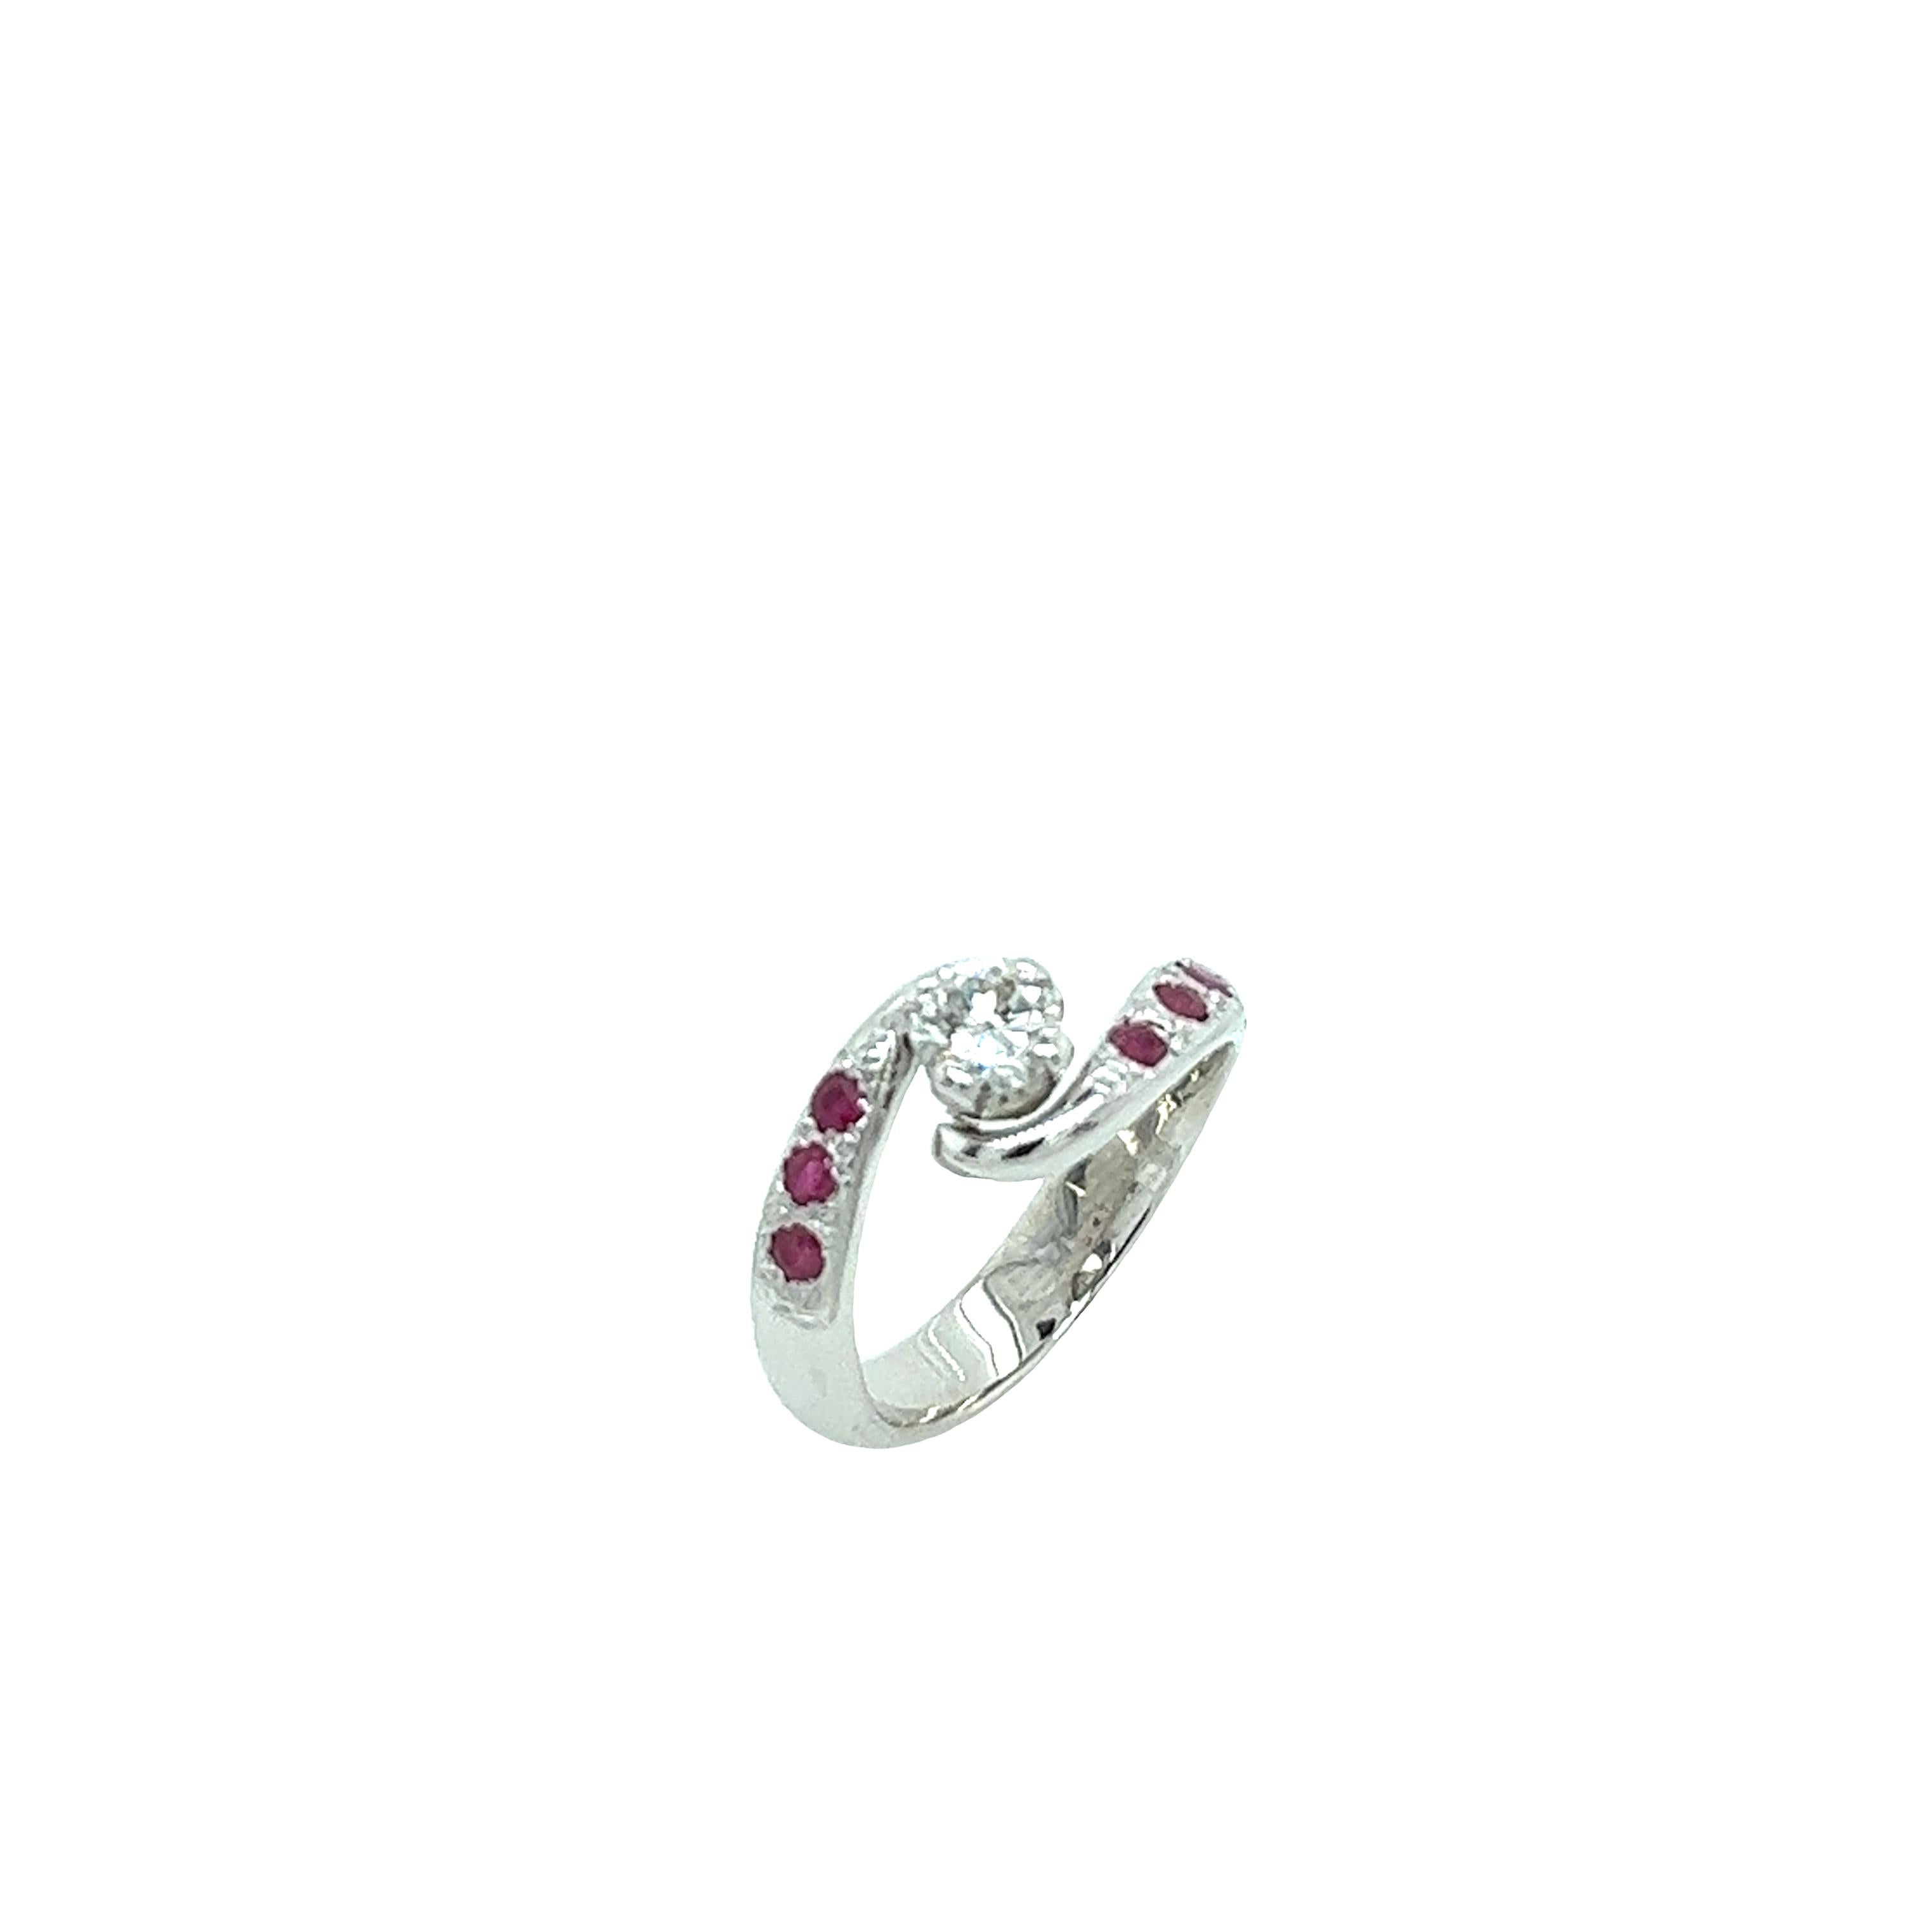 Women's Crossover Platinum Solitaire Round Diamond Engagement Ring 0.33ct with 6 Rubies